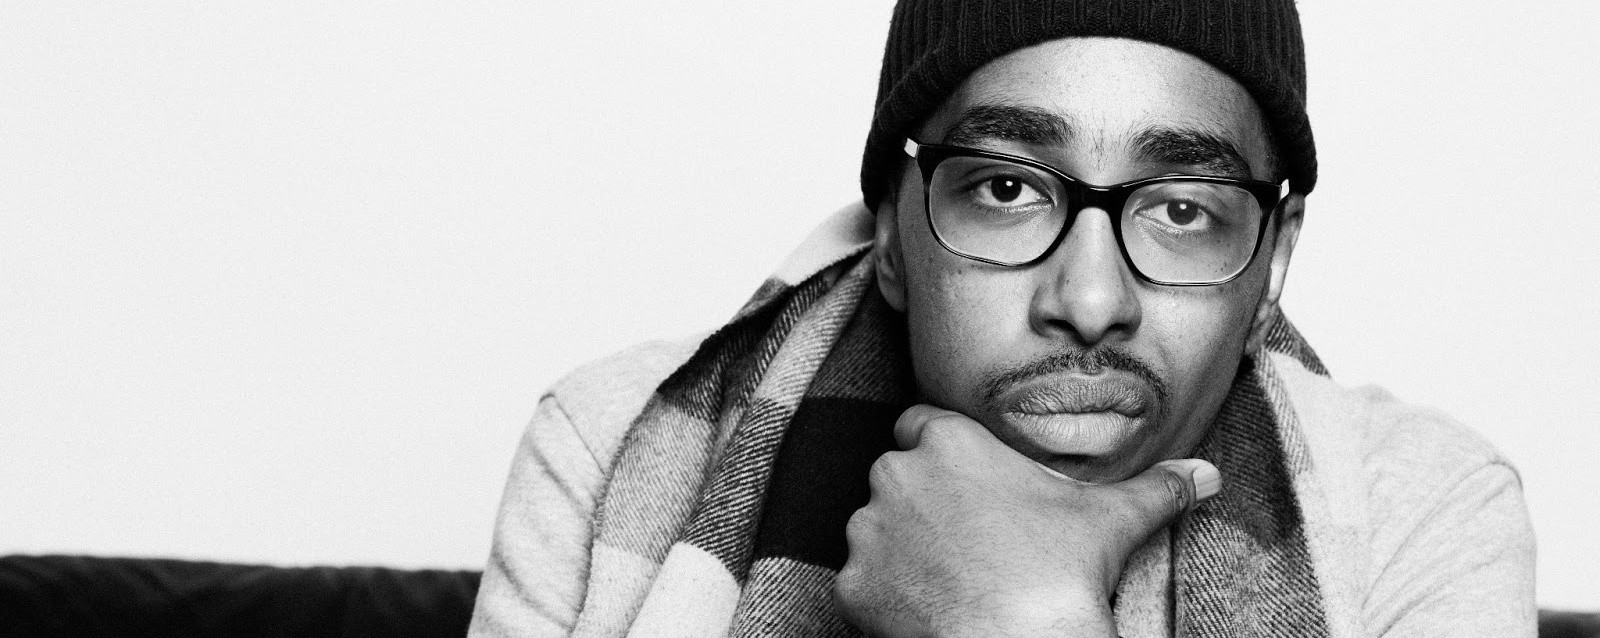 ODDISEE - live in Singapore